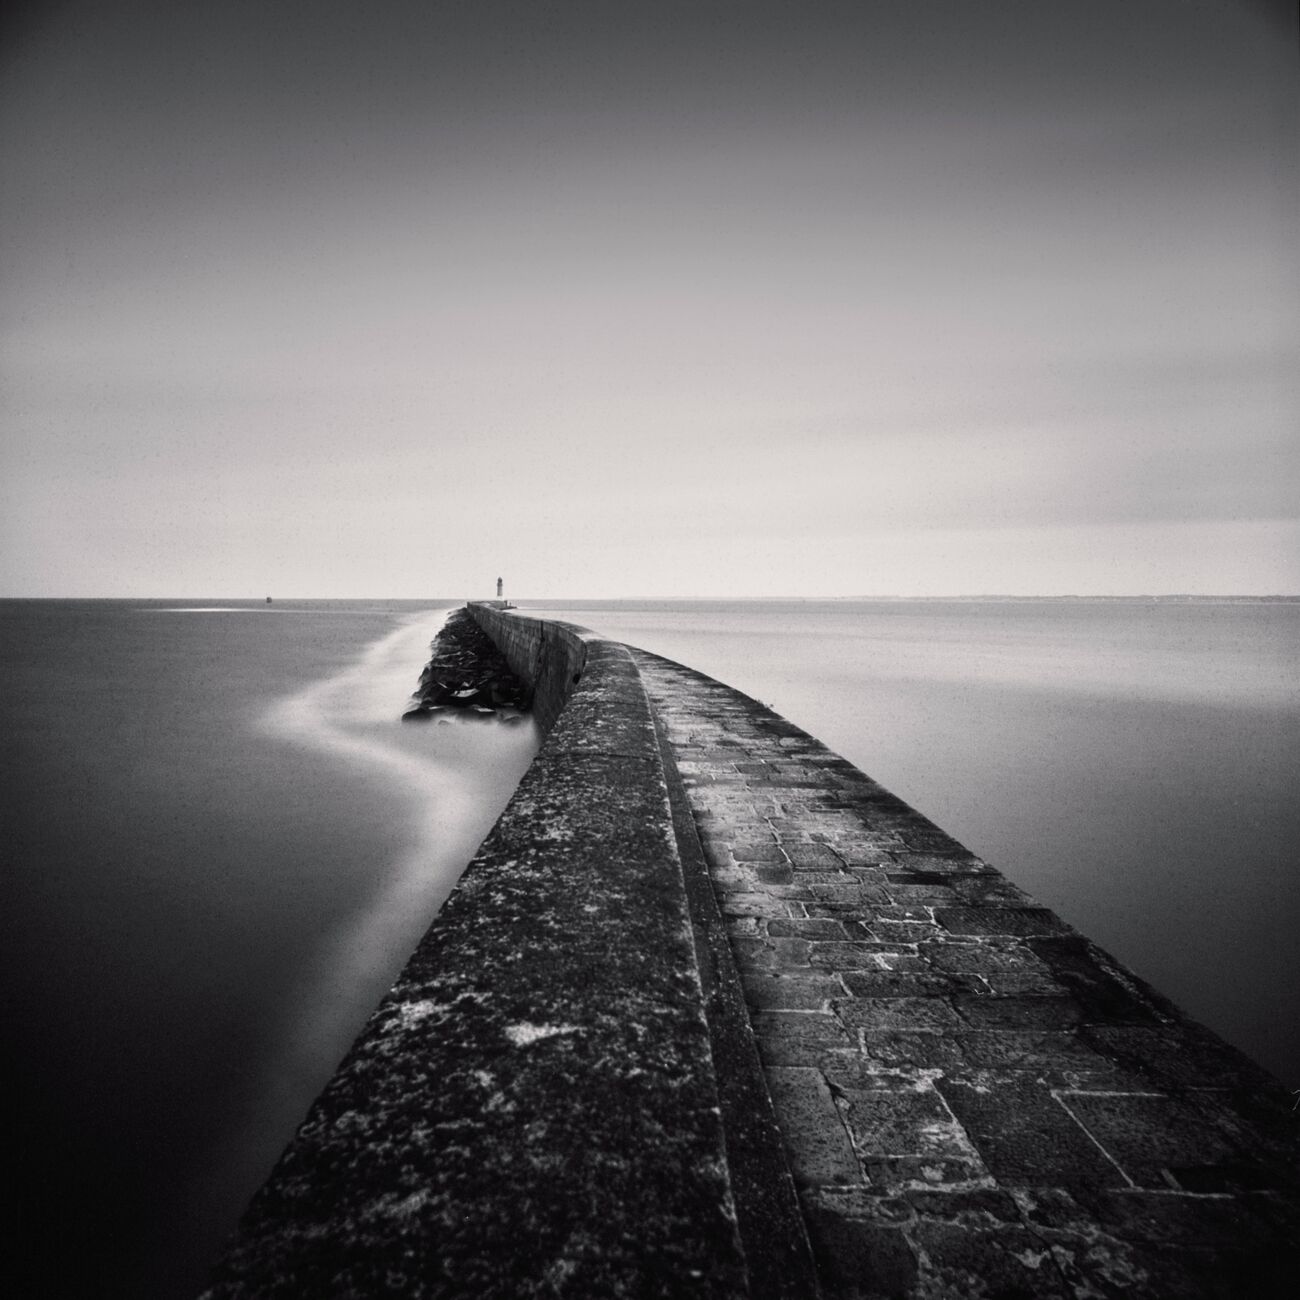 Tréhic Pier, Study 2, Le Croisic, France. May 2021. Ref-11470 - Denis Olivier Photography